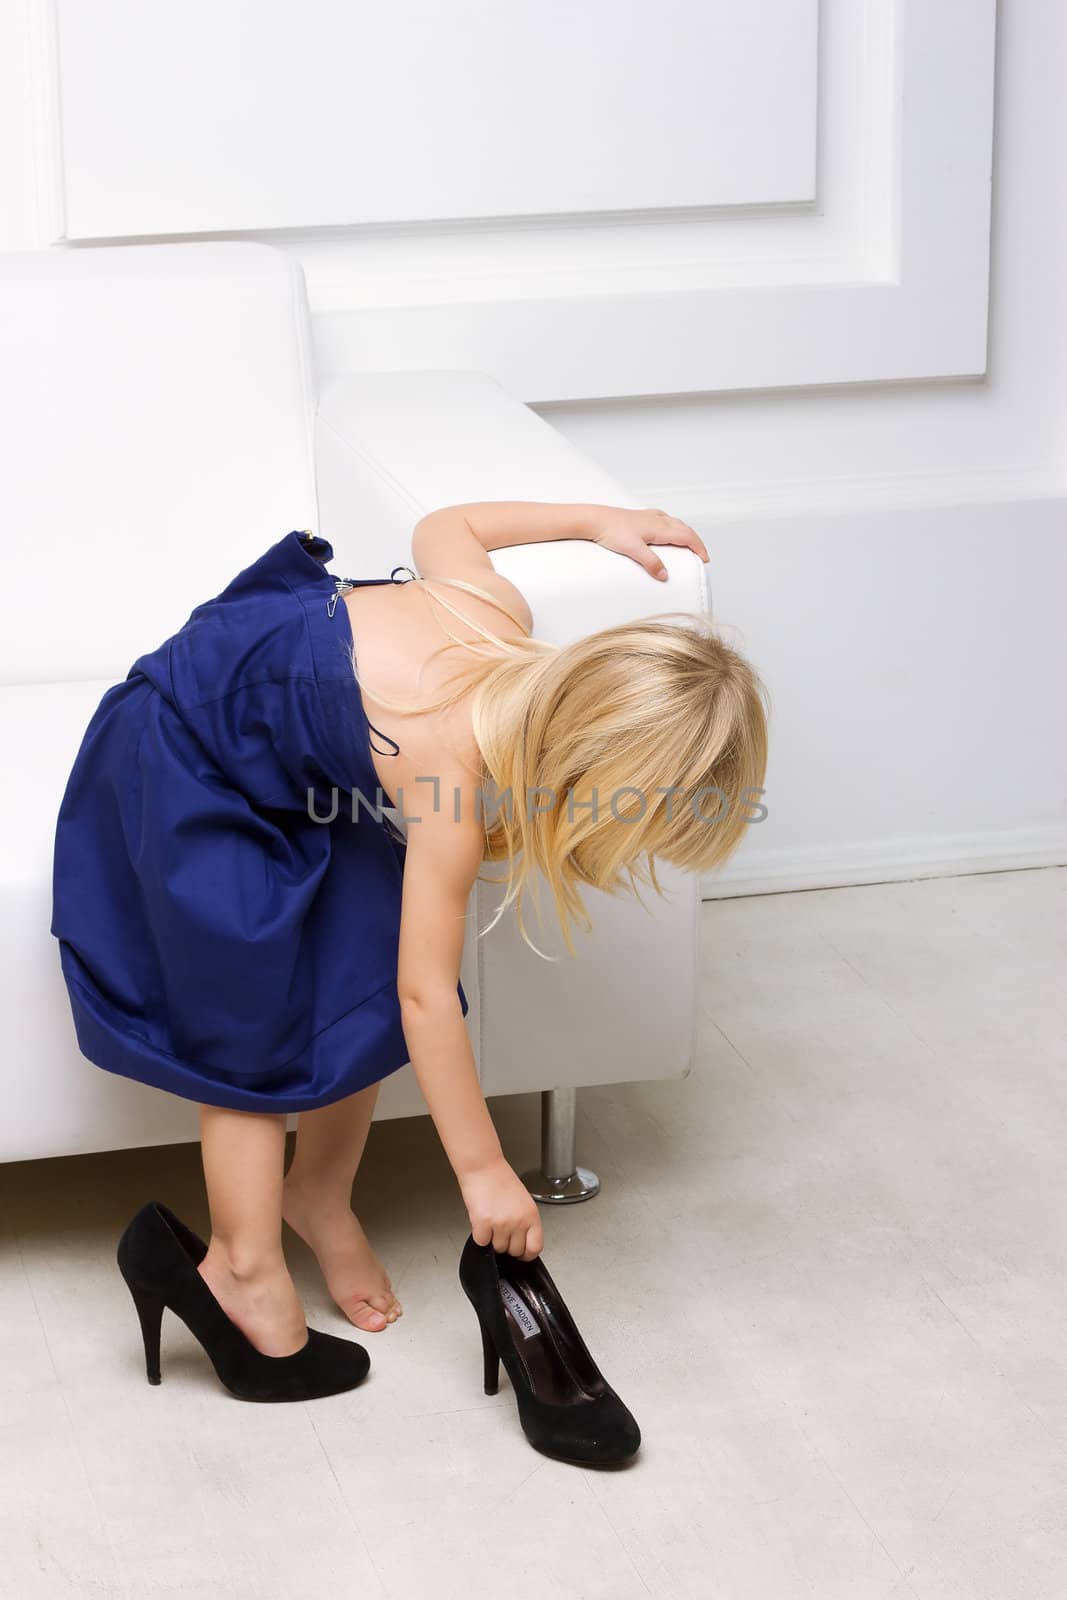 Little girl 3 years old standing near the white sofa in her mother's dress shoes and high heels